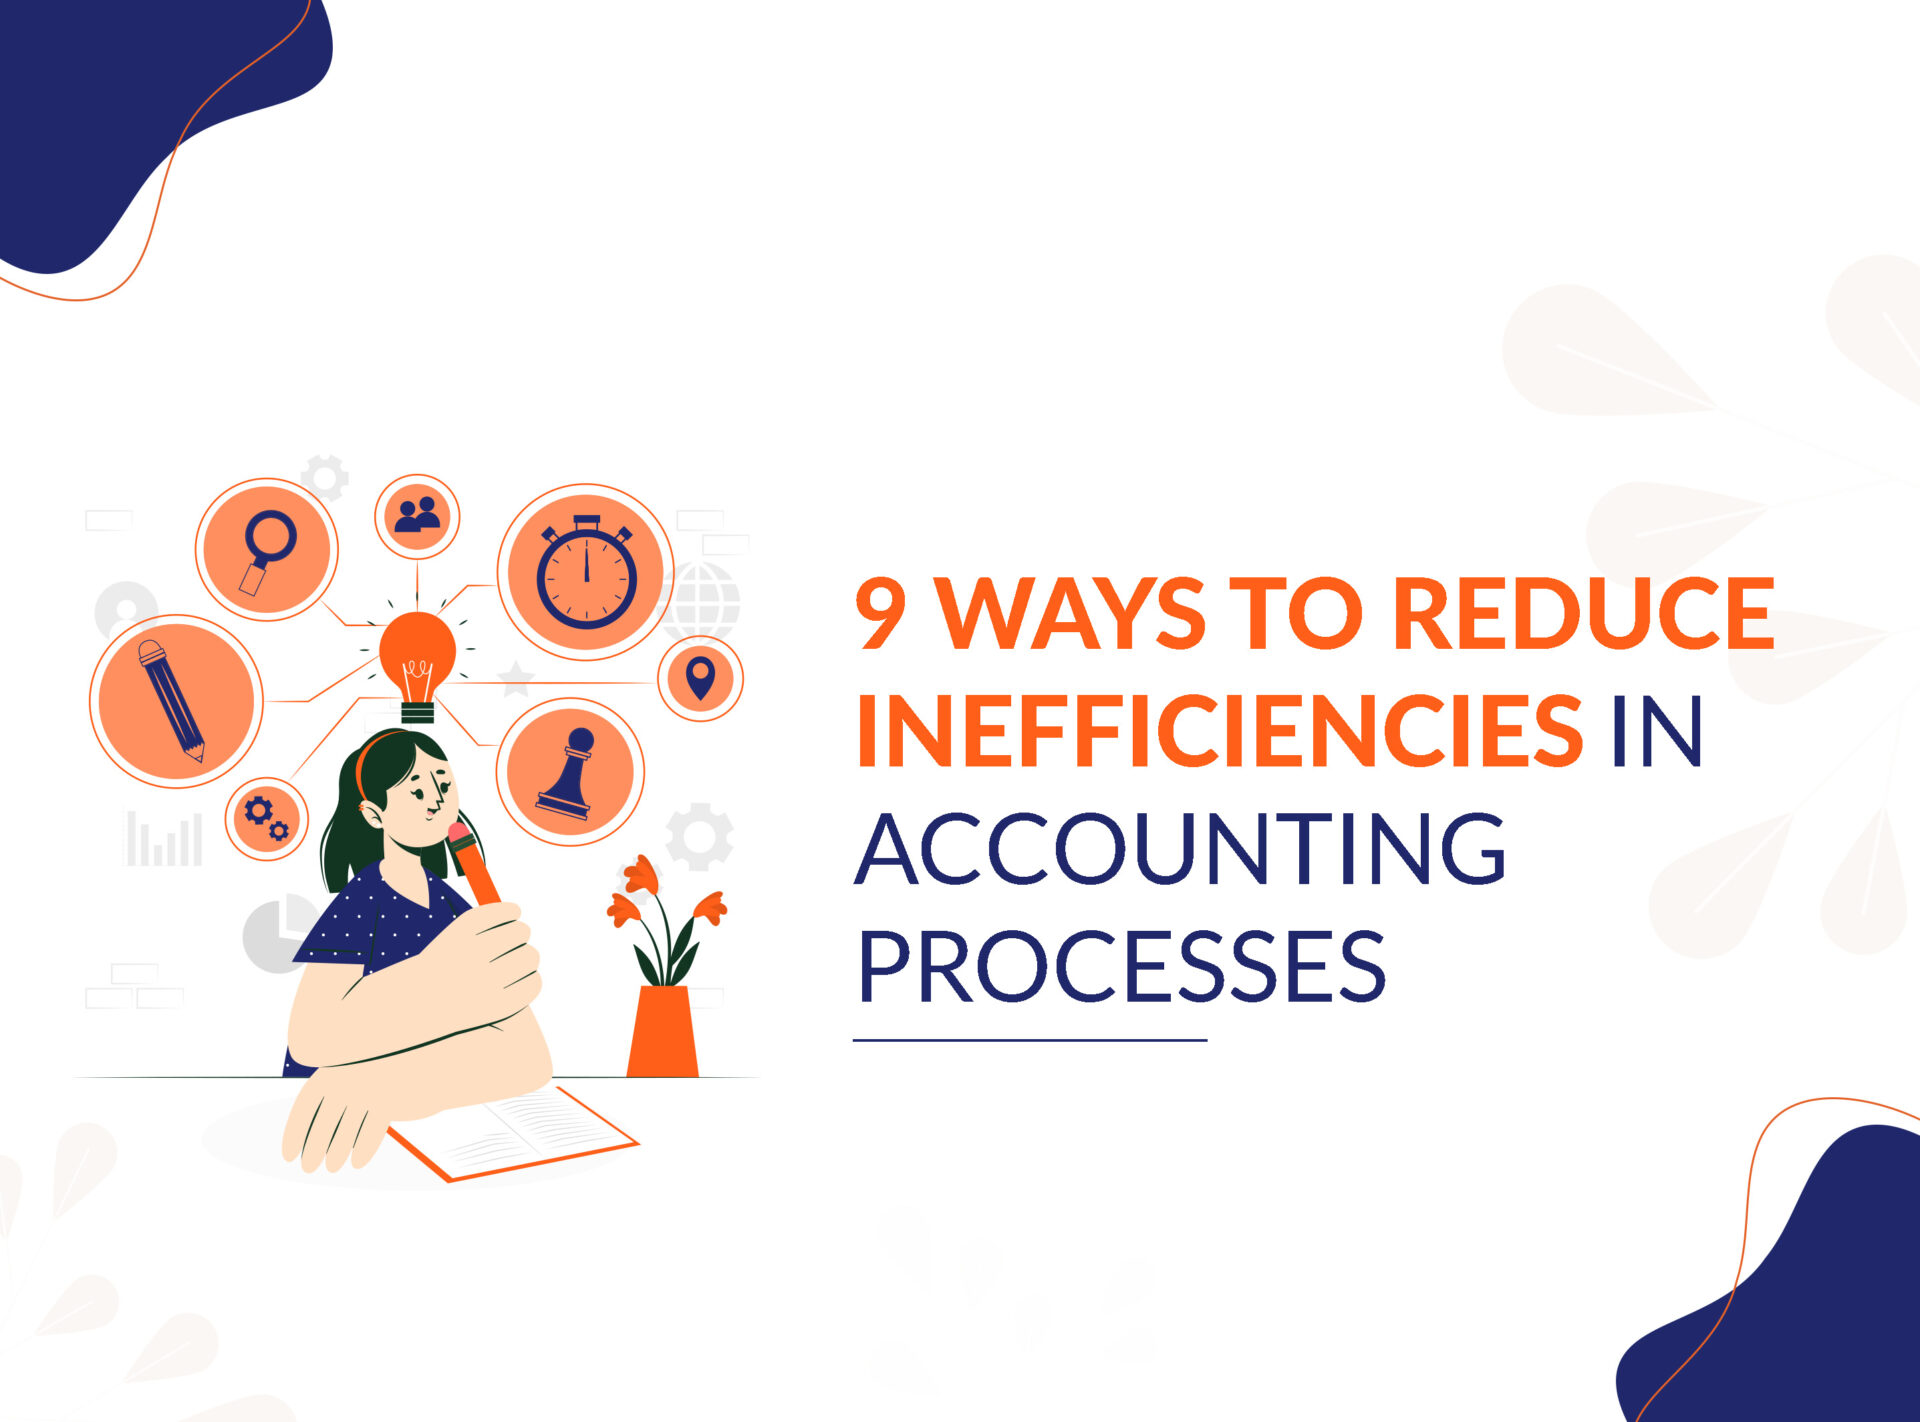 9 Best Ways to Reduce Inefficiencies in Accounting Processes